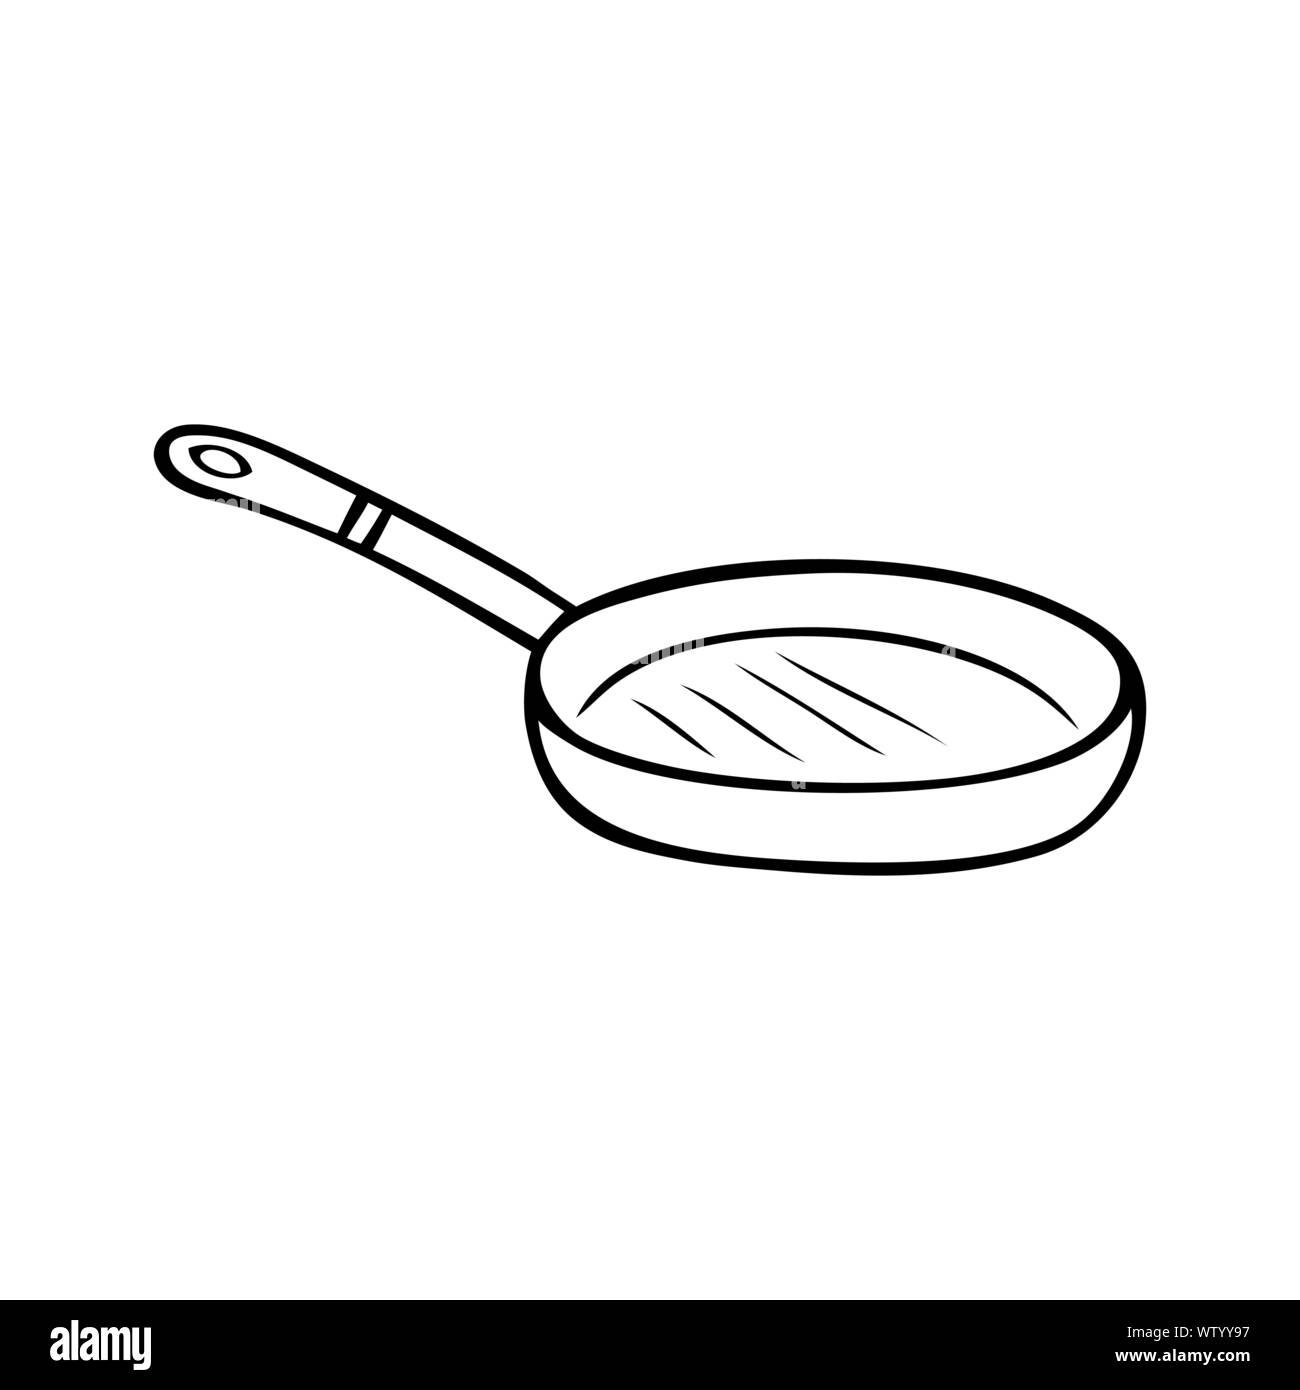 Amazing frying pan coloring page for 3-4 year olds